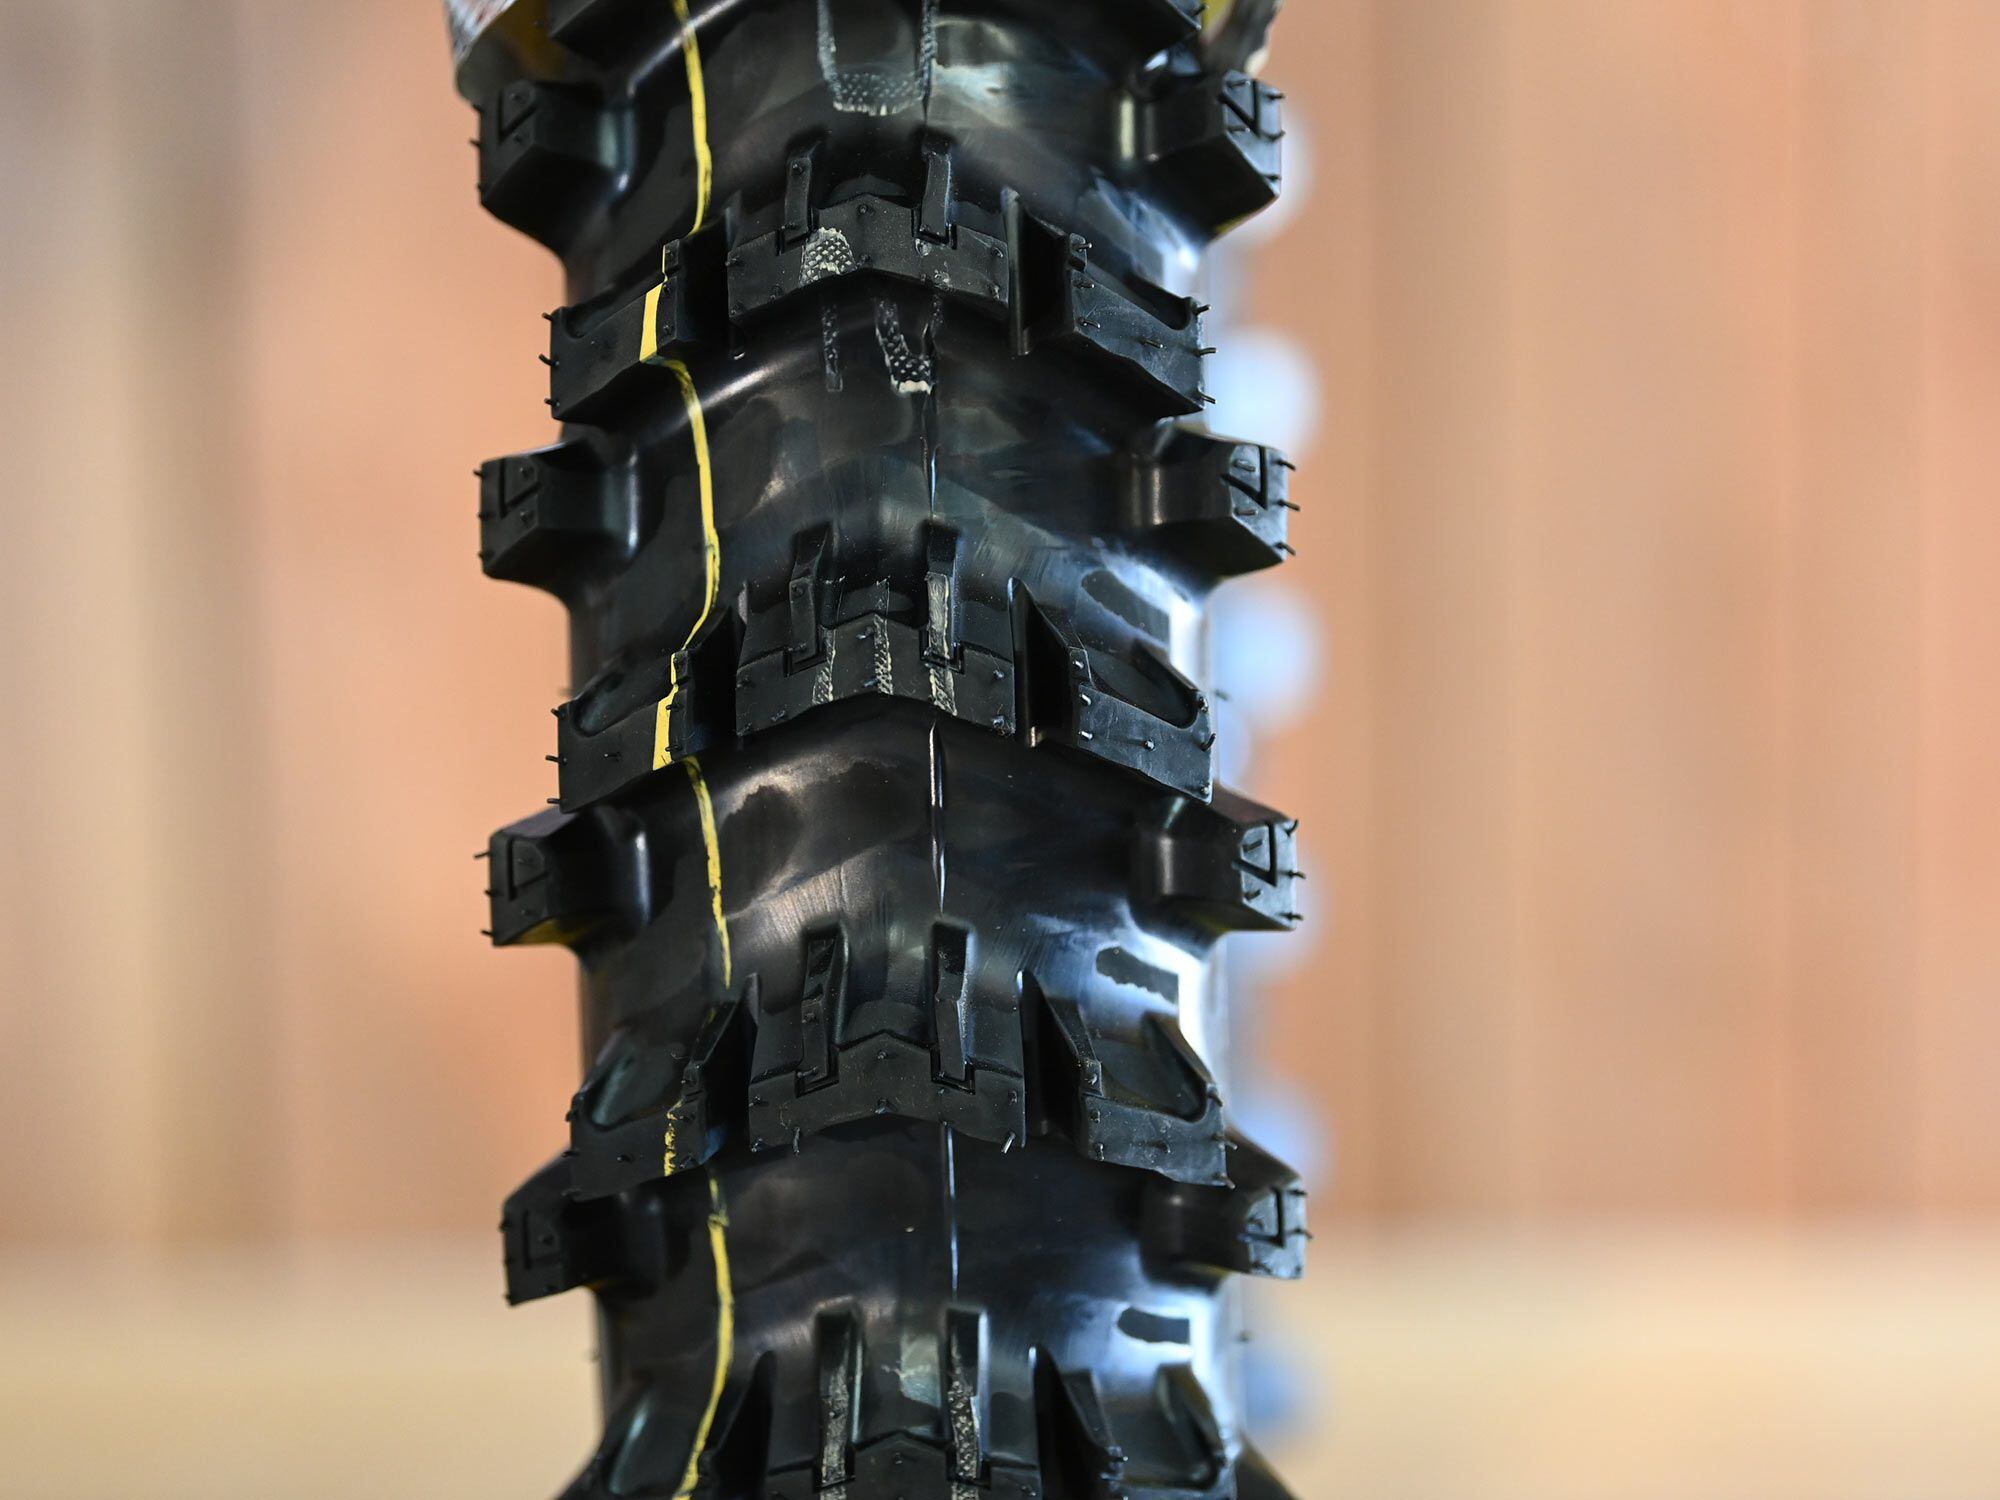 According to Dunlop, the optimized tread design and block angles are intended to improve the tire’s scoop/paddle effect.